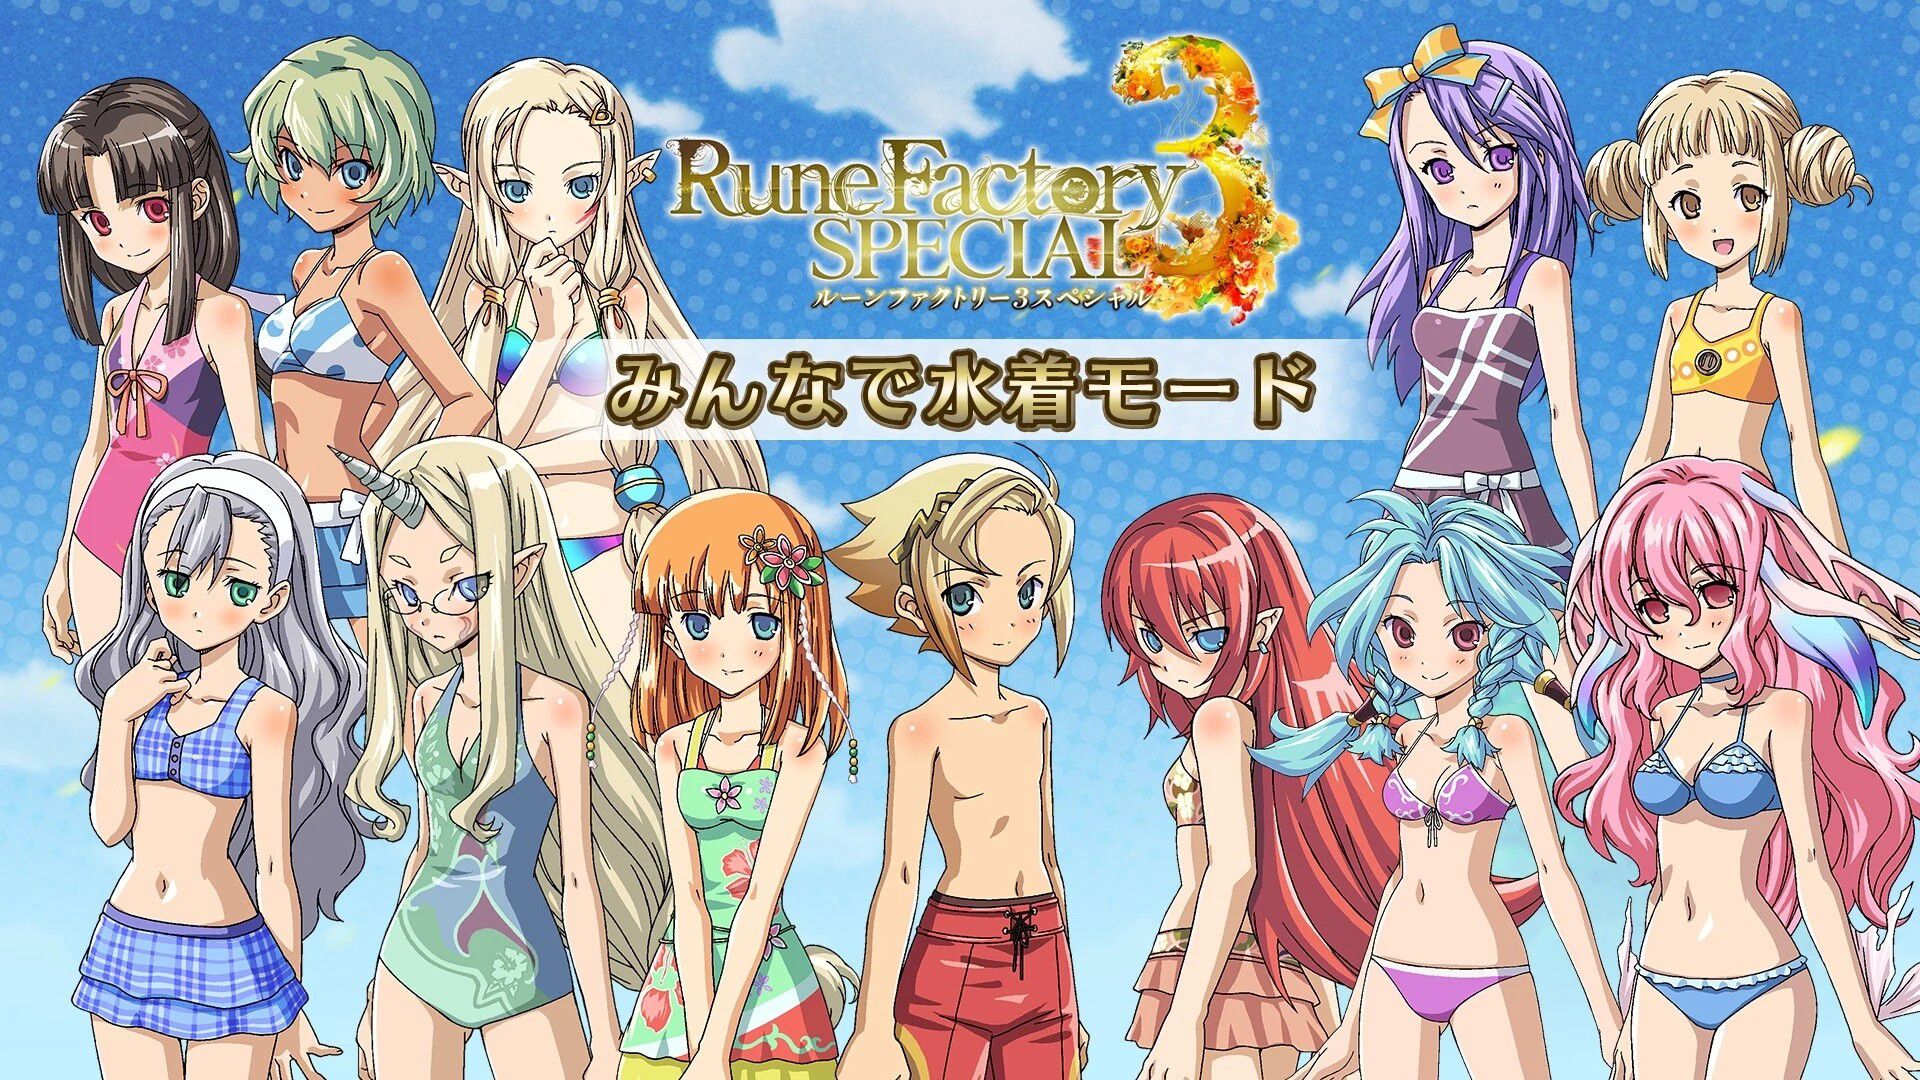 Switch "Rune Factory 3 Special" "Everyone swimsuit mode" that allows girls to wear swimsuits 3